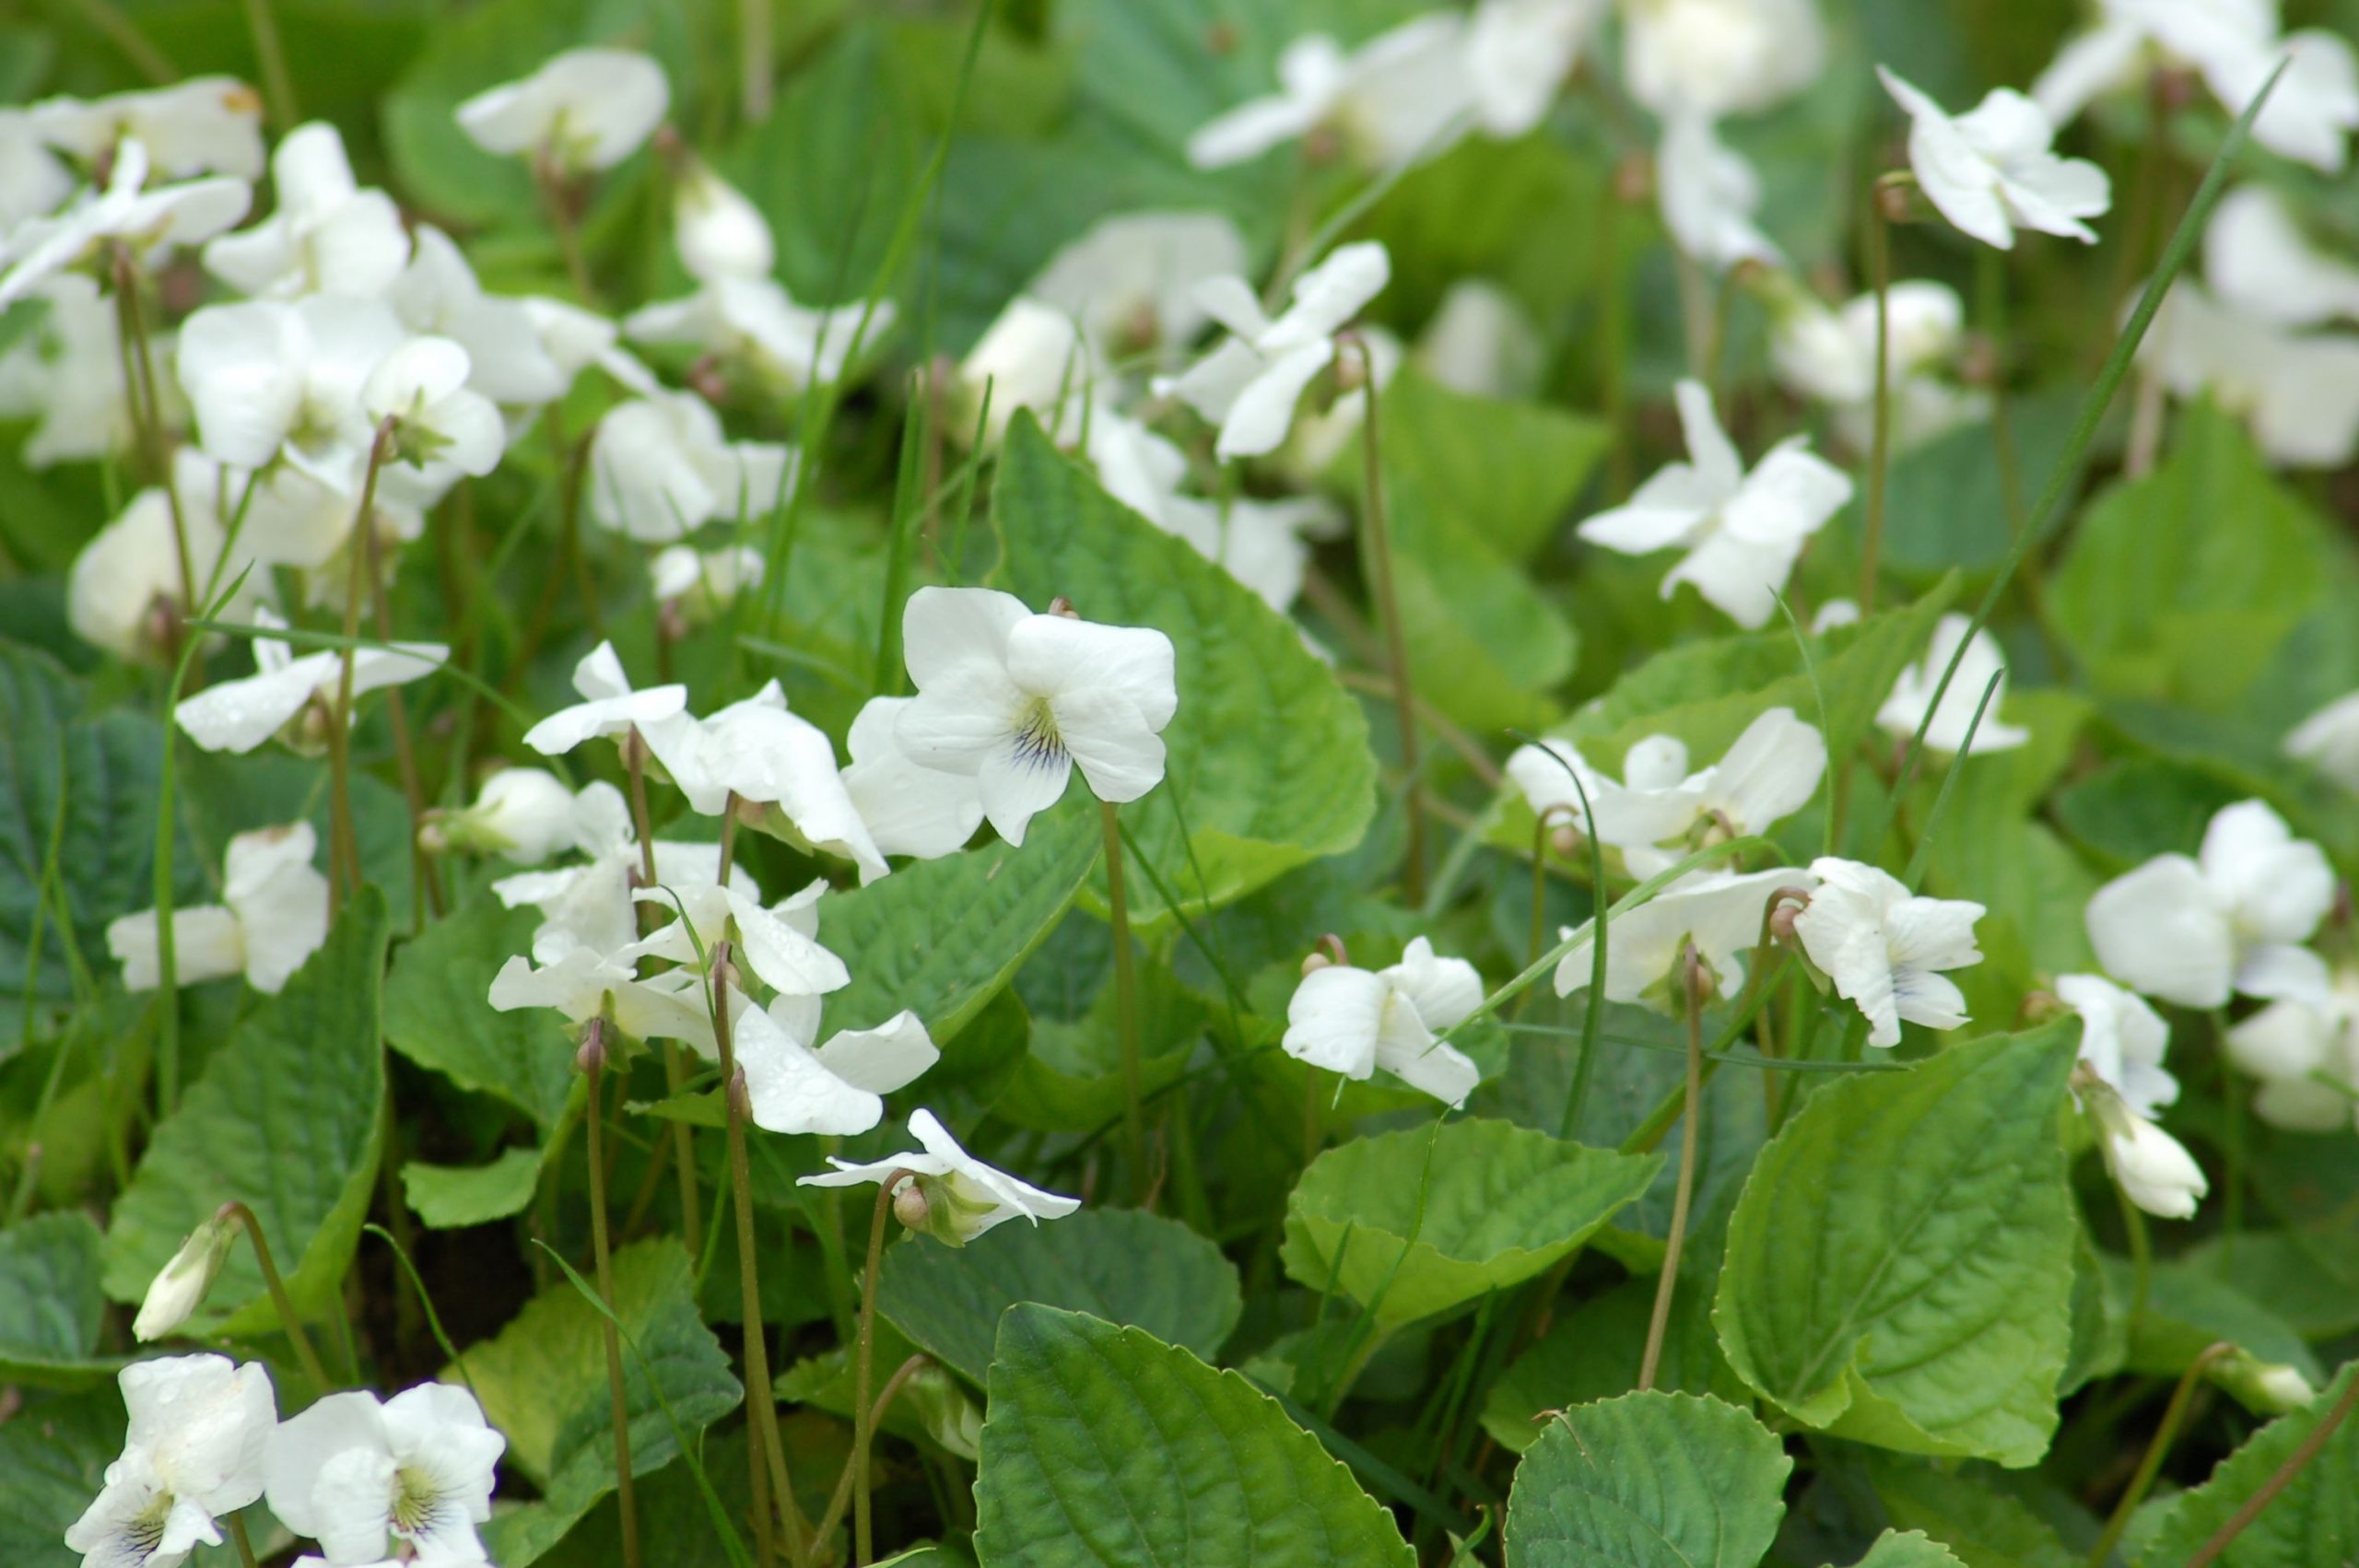 How to Get Rid of Wild Violets in the Lawn